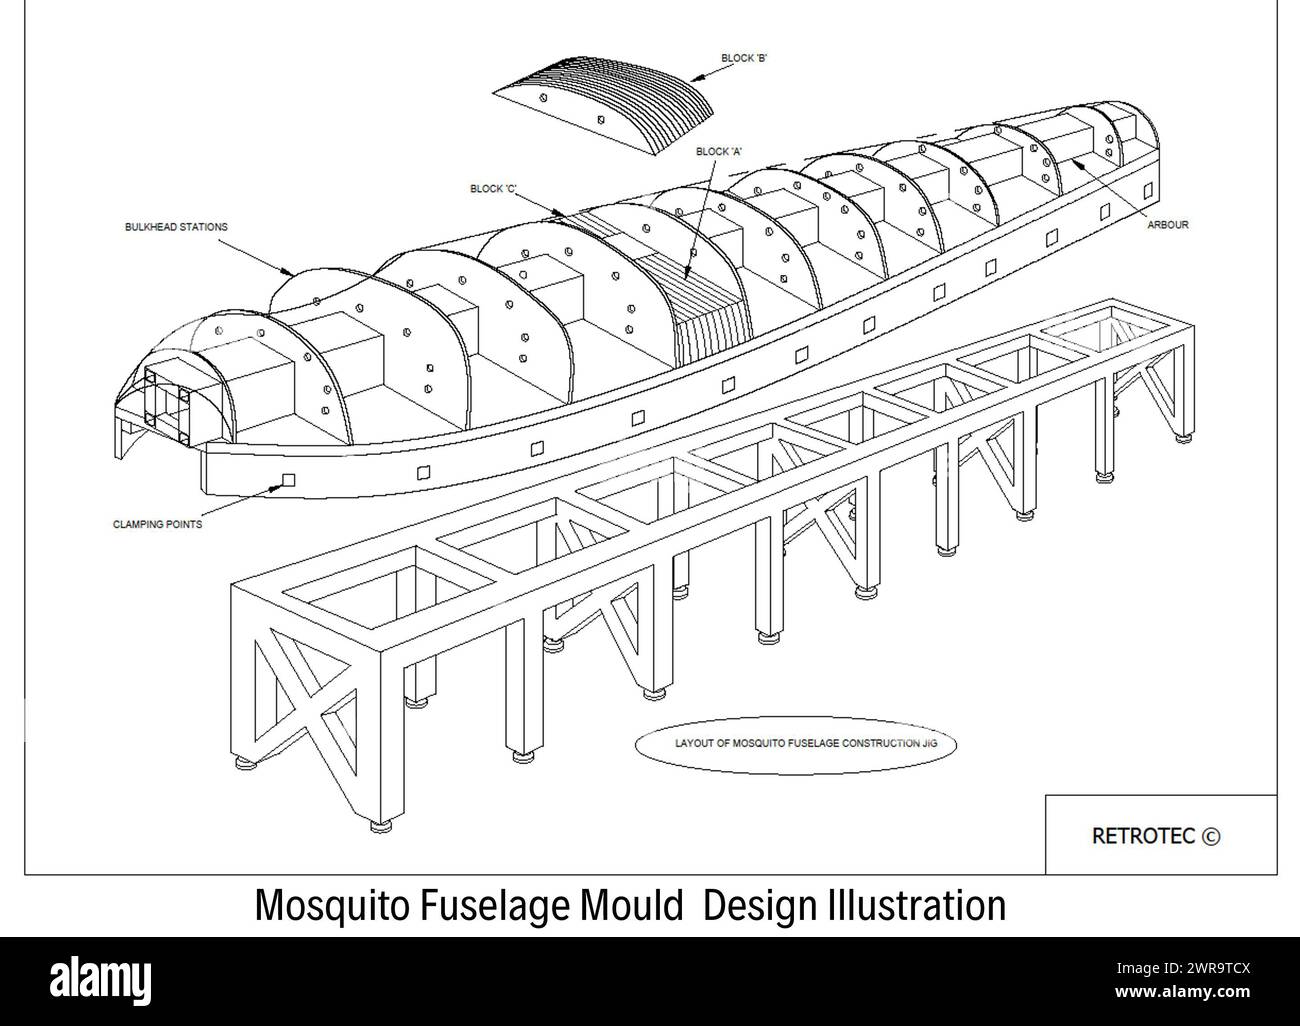 04/06/22   Collect photo - best quality available:  Mosquito fuselage mould design illustration.  Full story: https://docs.google.com/document/d/17yHt Stock Photo